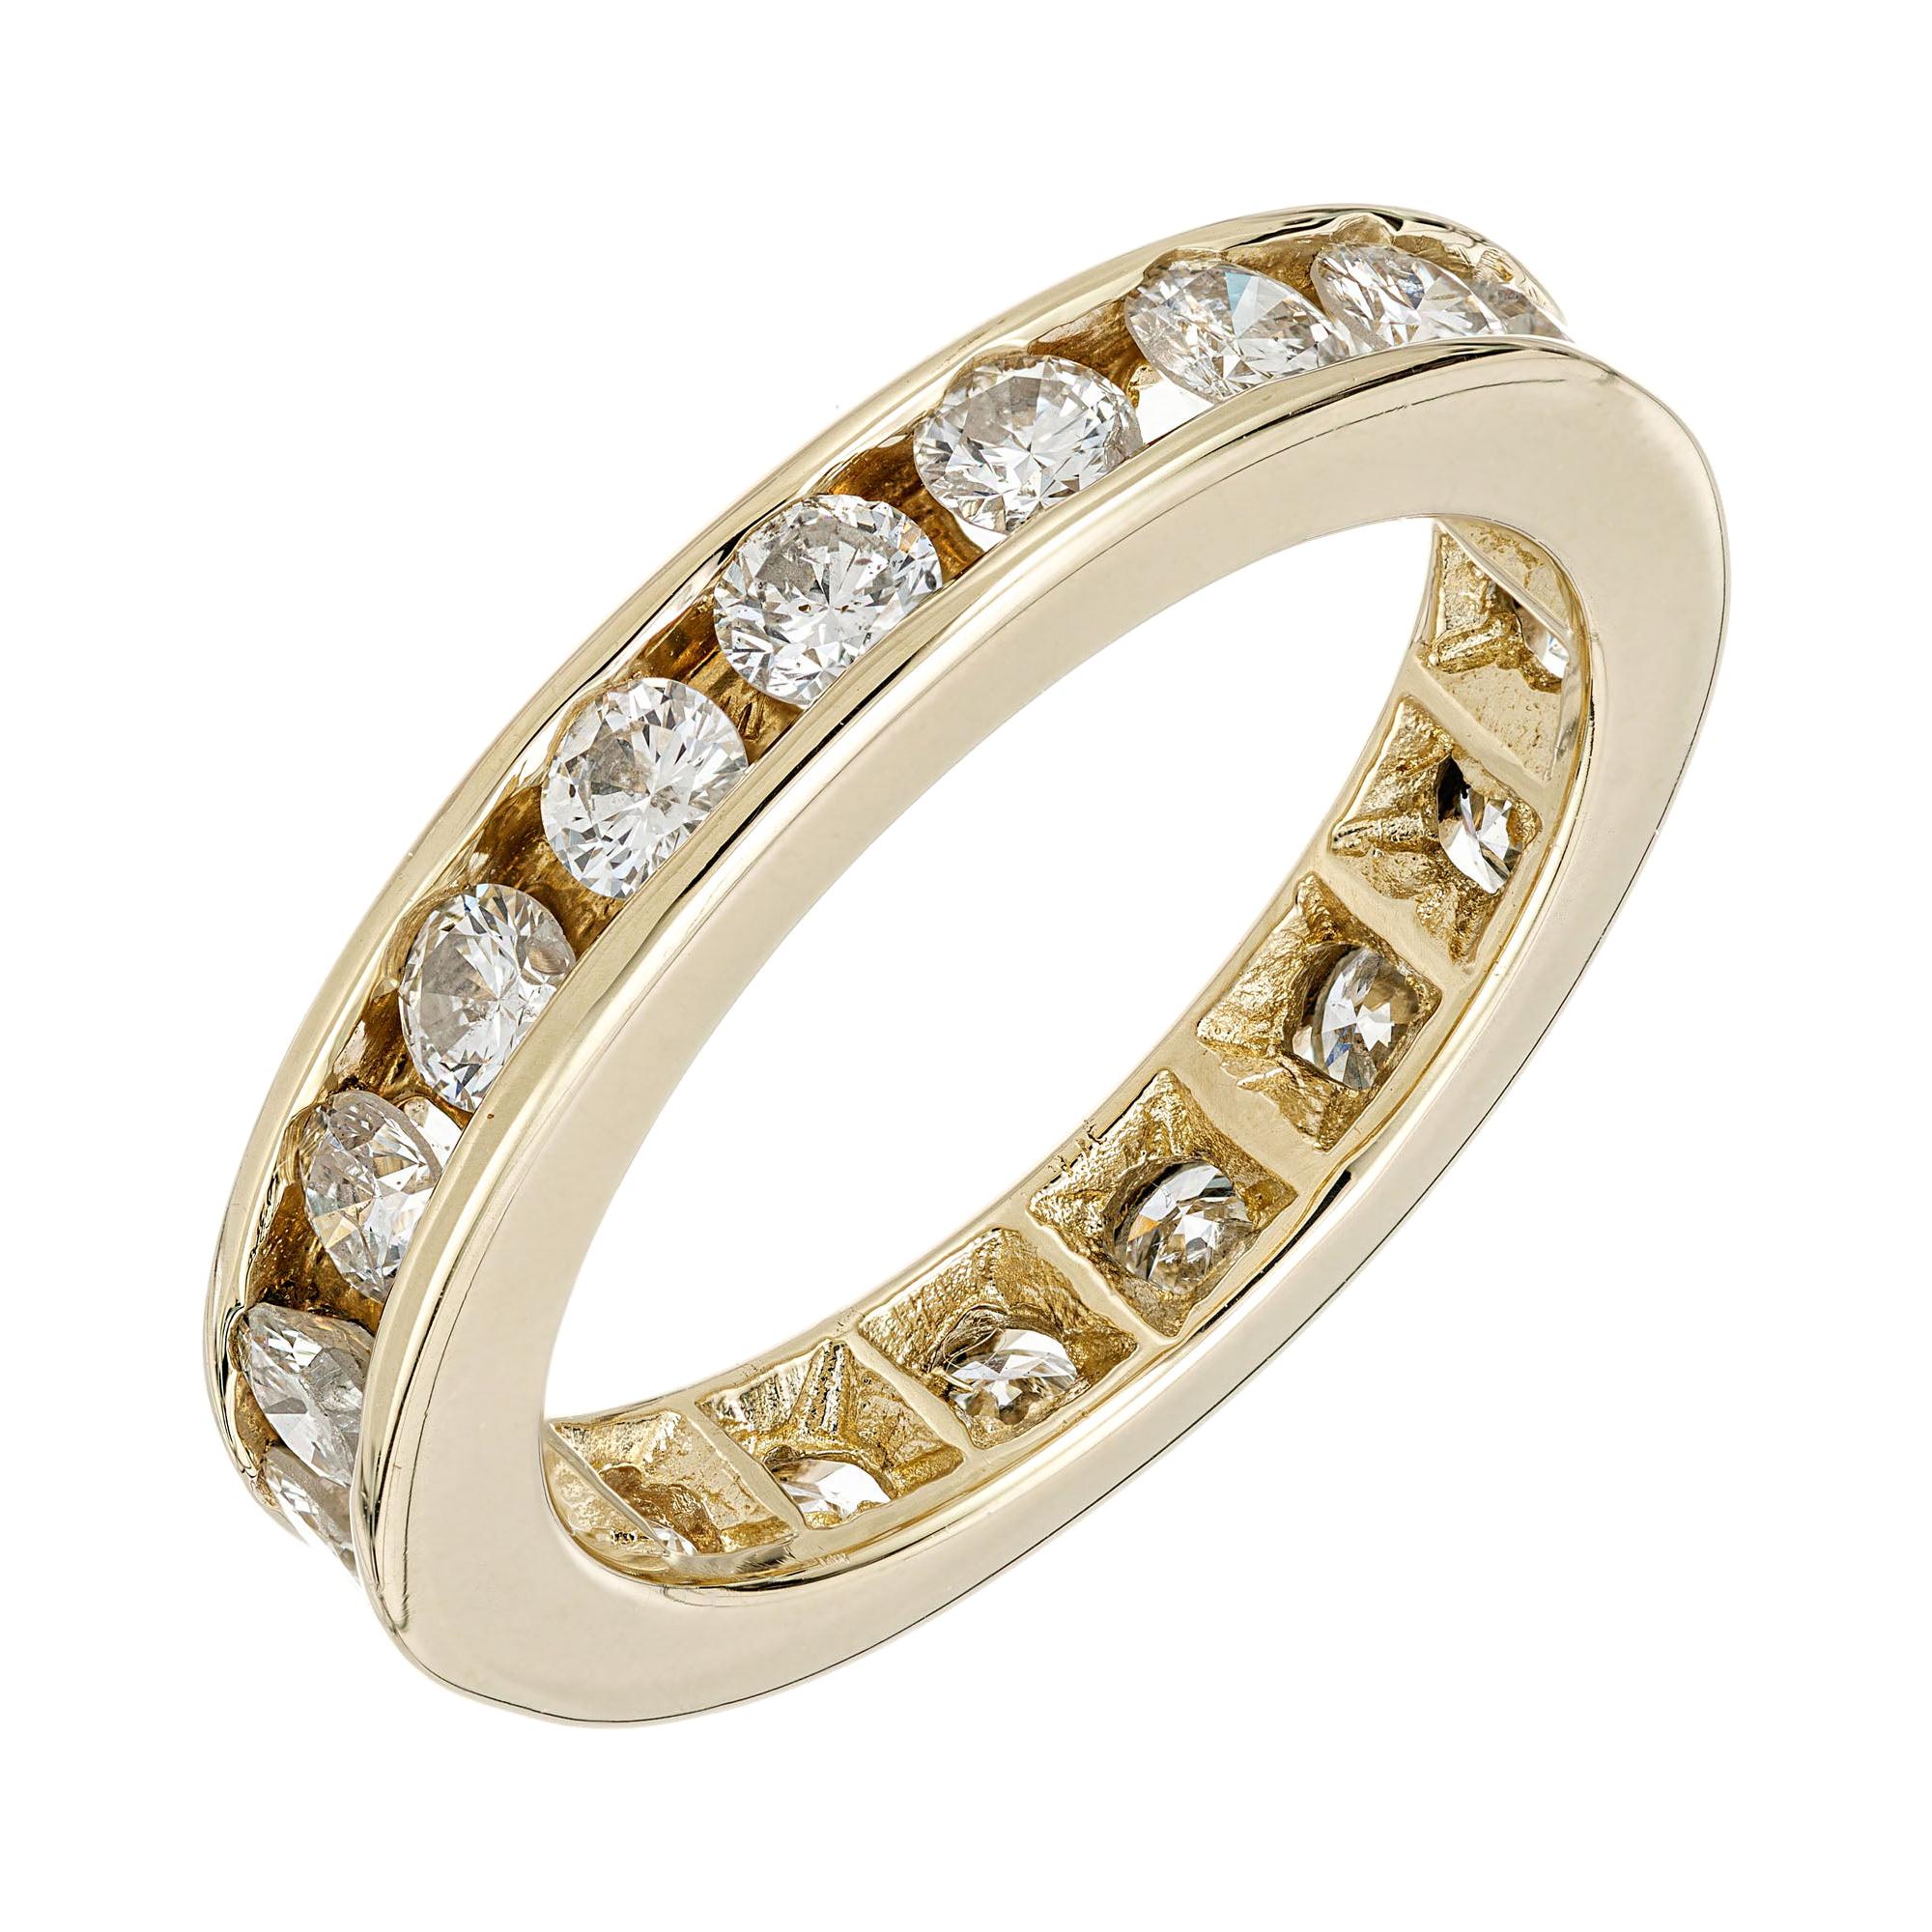 1.15 Carat Diamond Yellow Gold Eternity Band Ring For Sale